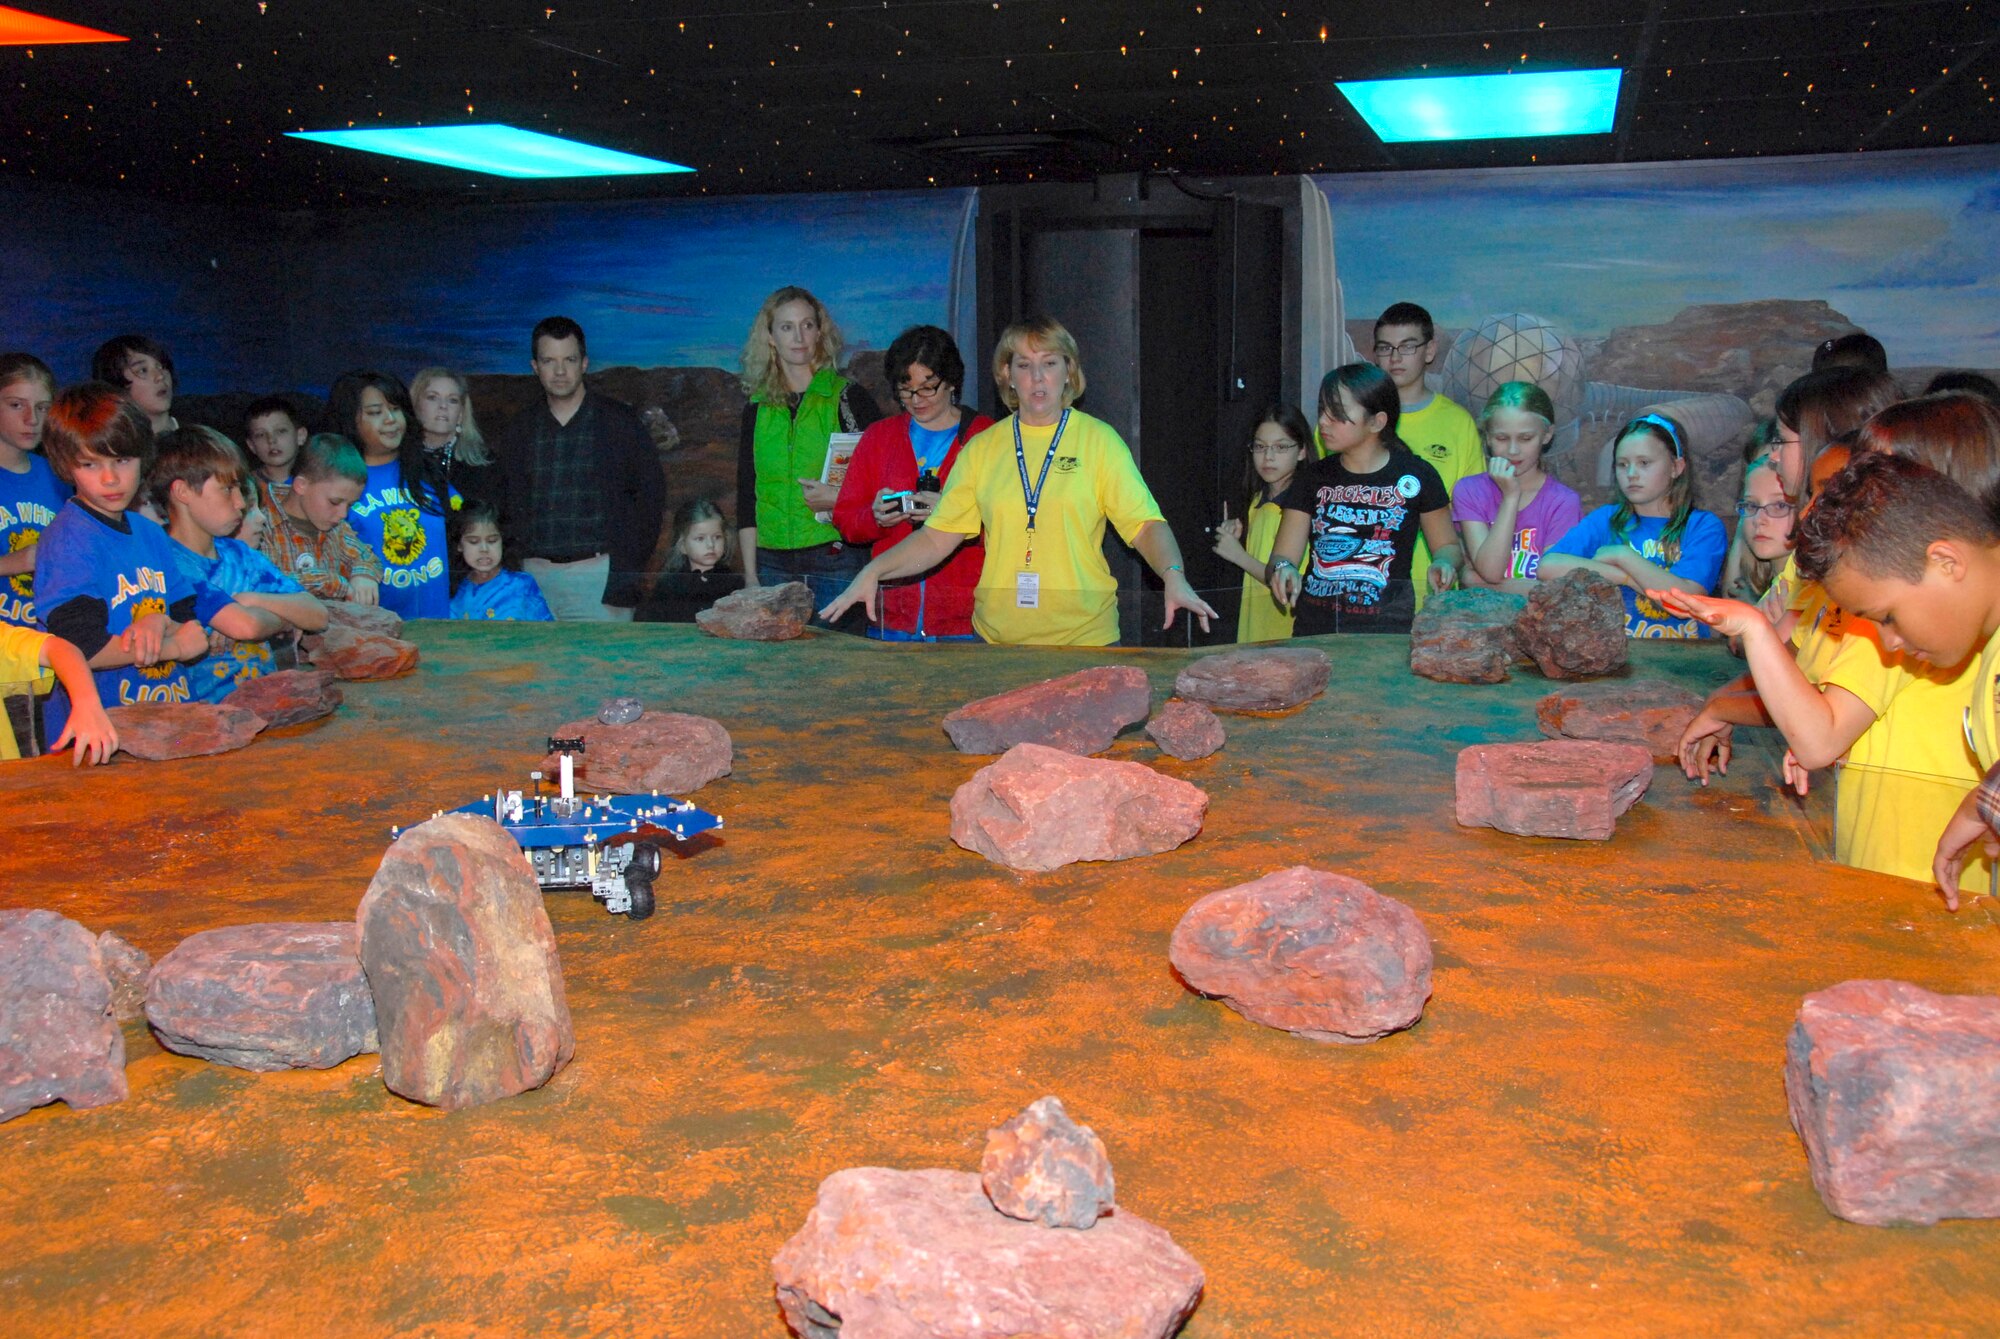 As a part of their tour for the First Lego League, students visited a replica of the Martian surface, led by teacher Becky Hill, at Starbase. Maxwell Elementary School hosted six regional schools for the FLL gathering, including six from Fort Benning, Ga. and one from Fort Rucker, Ala., on March 31. (Air Force photo by Jamie Pitcher)